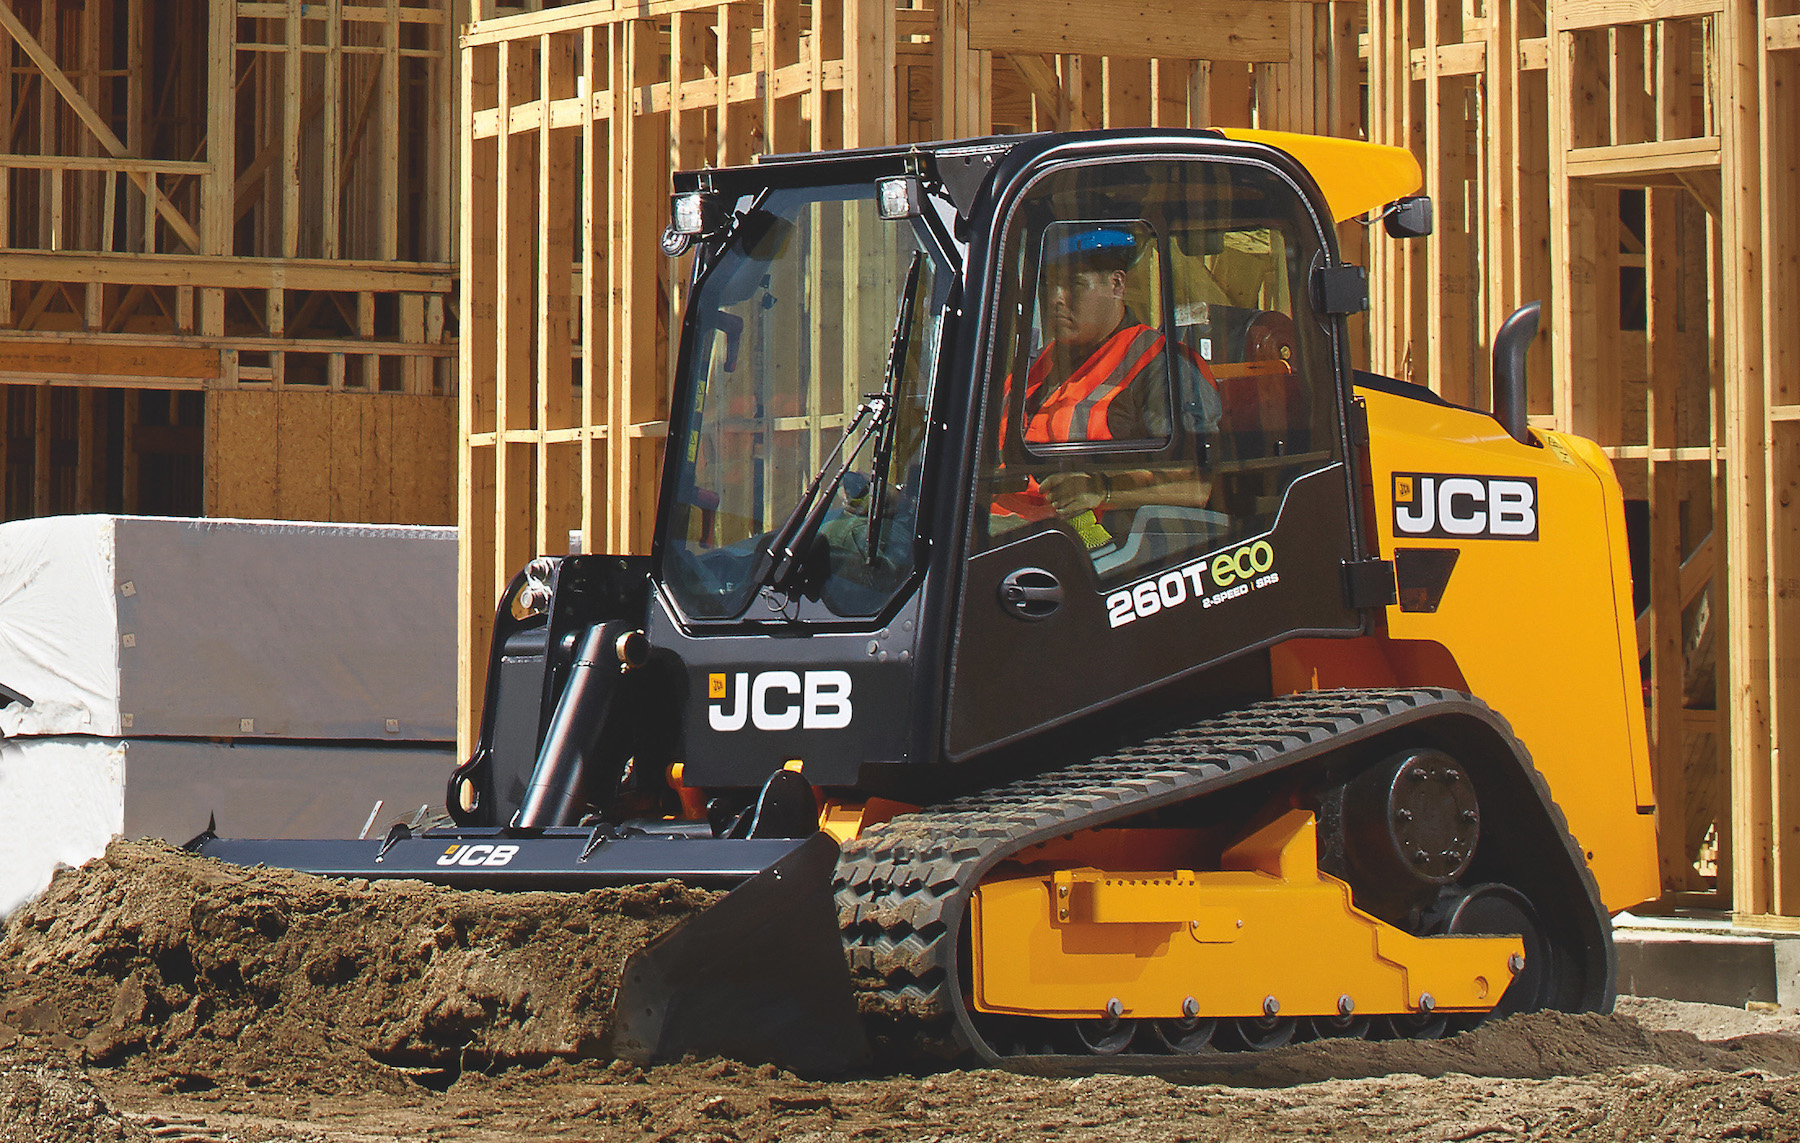 Designed and built in Savannah, Ga., the JCB 260T vertical lift compact track loader features a single-arm boom and side door entry design.